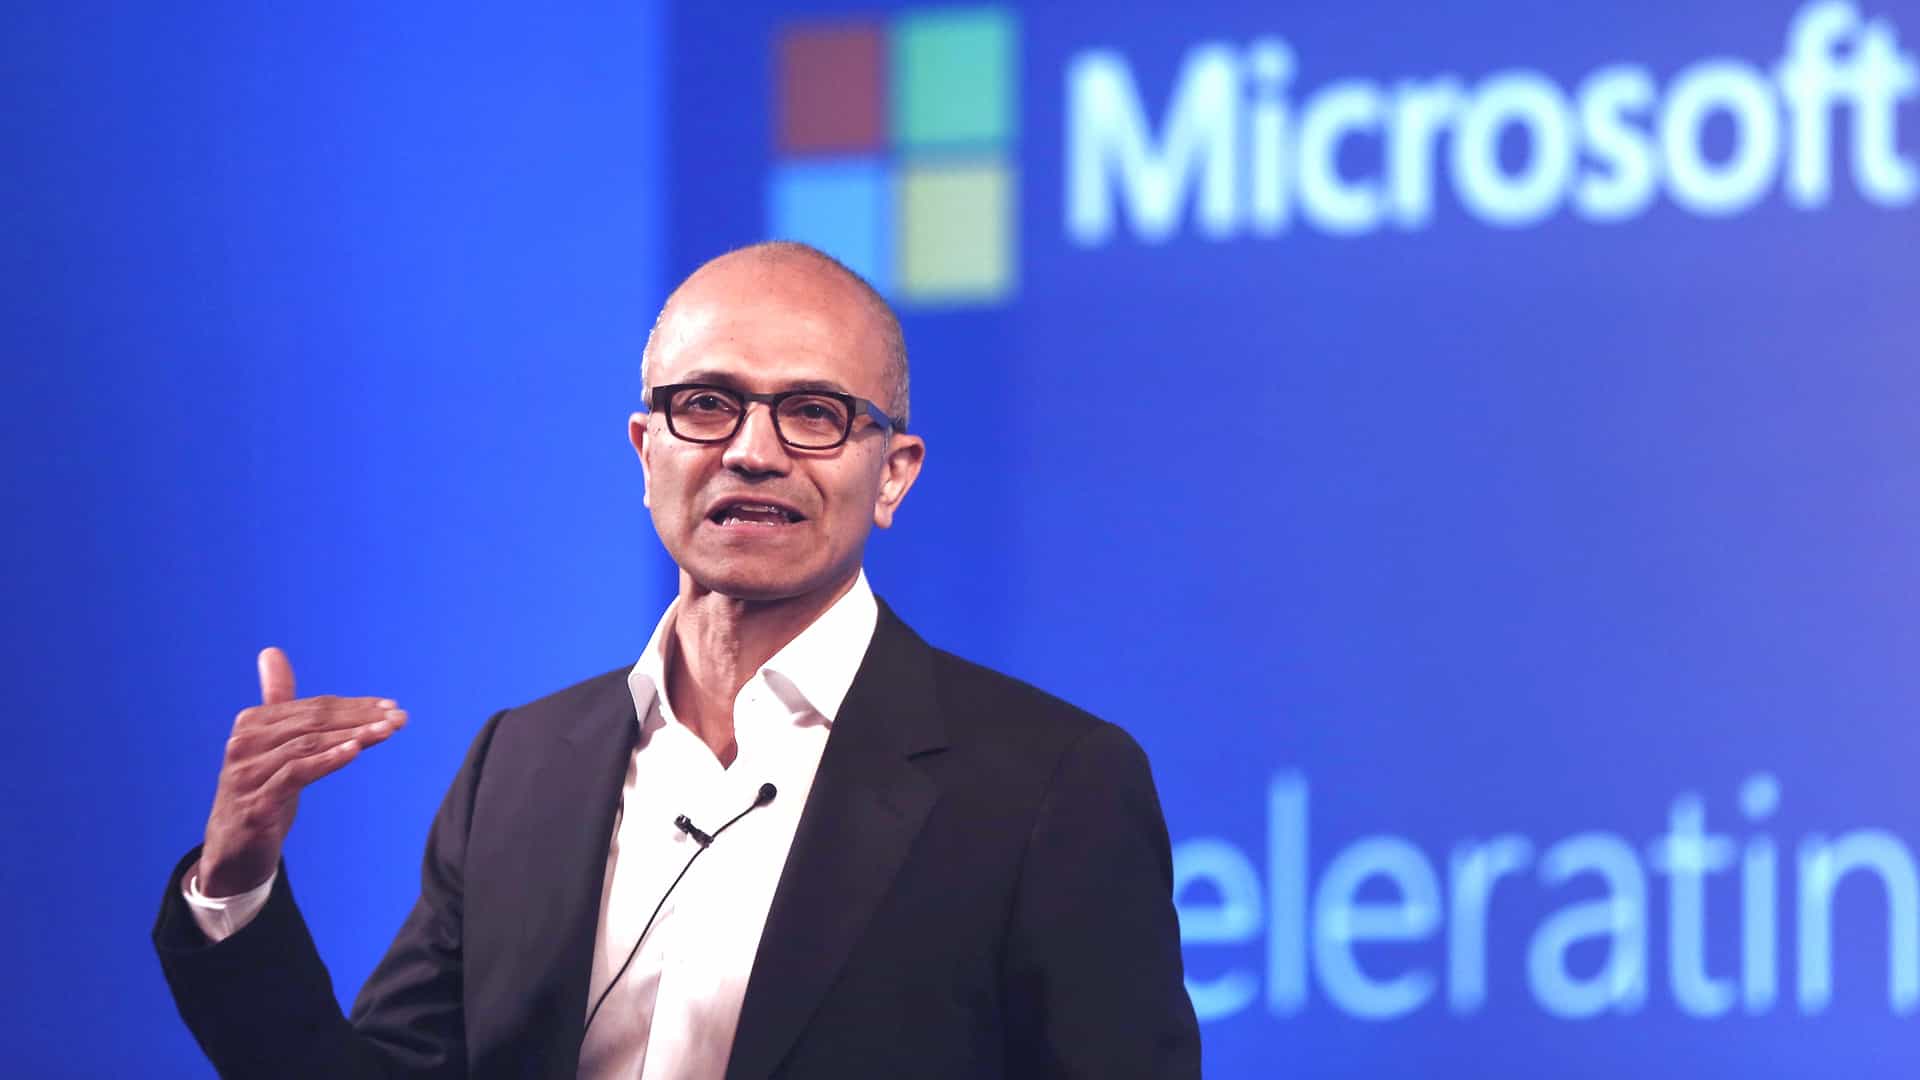 Microsoft committed to use its resources to support India's fight against Covid-19, says CEO Satya Nadella